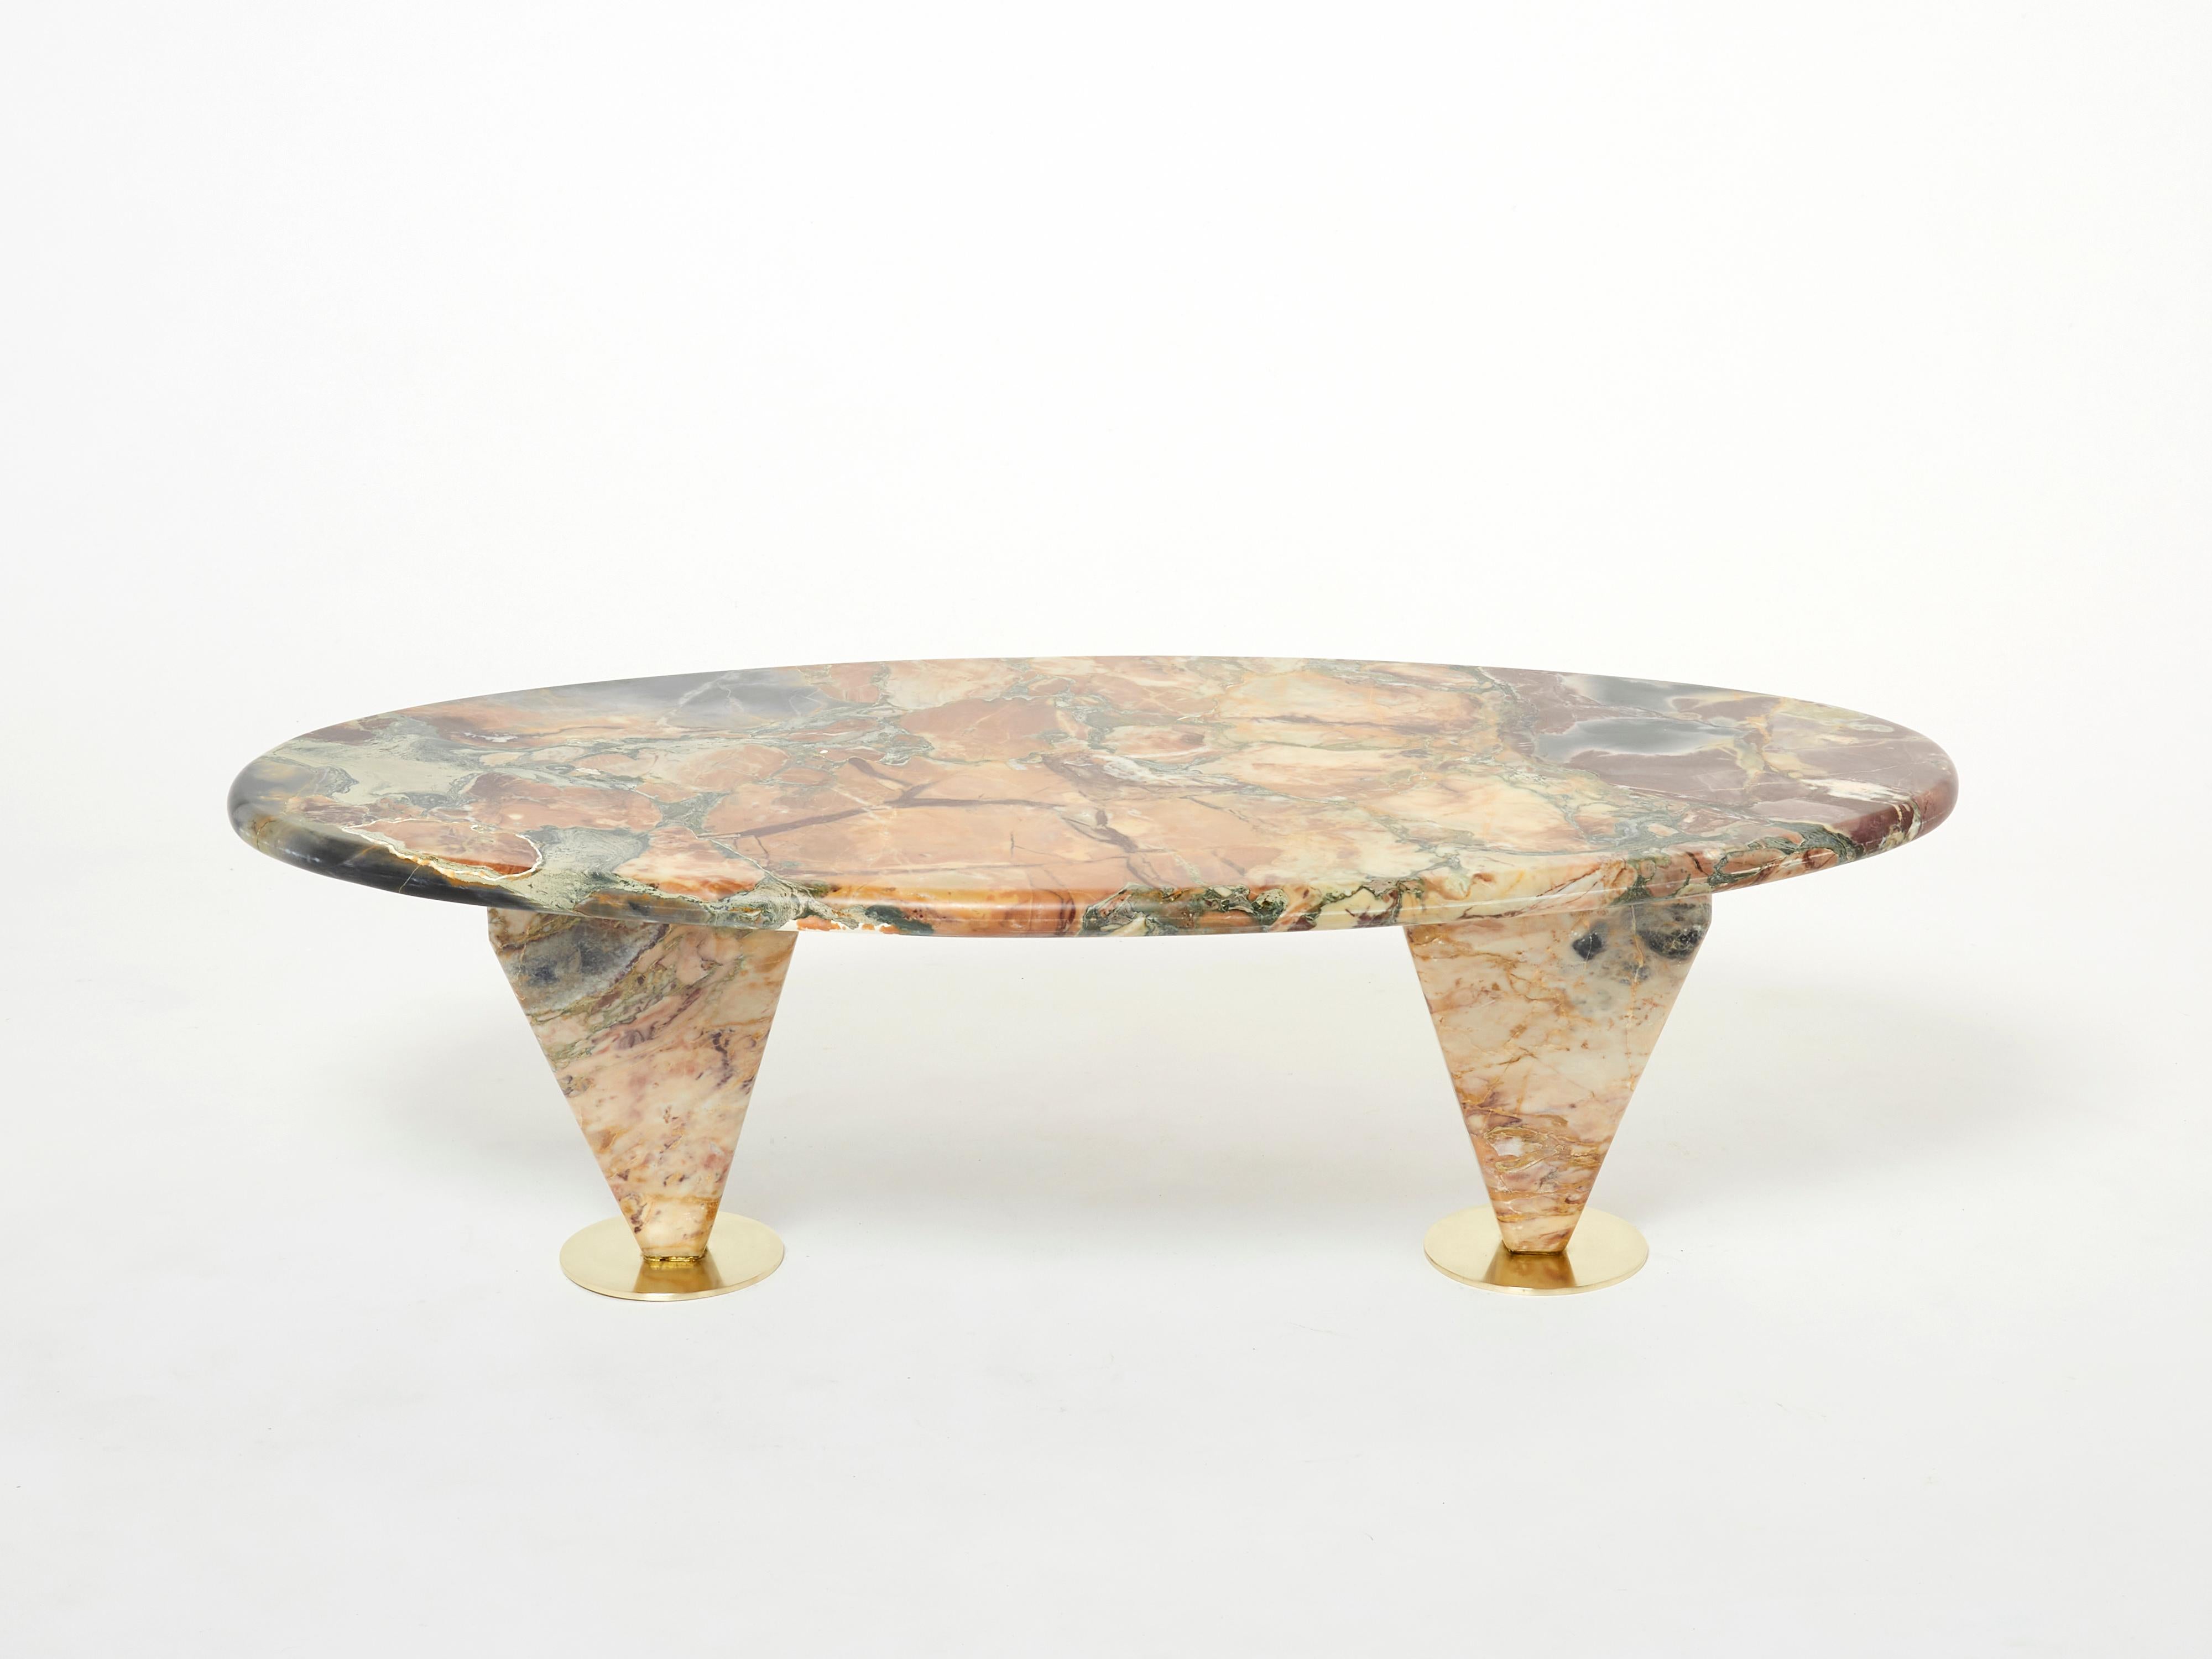 Oval Free Form Eye Breccia Benou Marble Brass Coffee Table 1980s For Sale 3